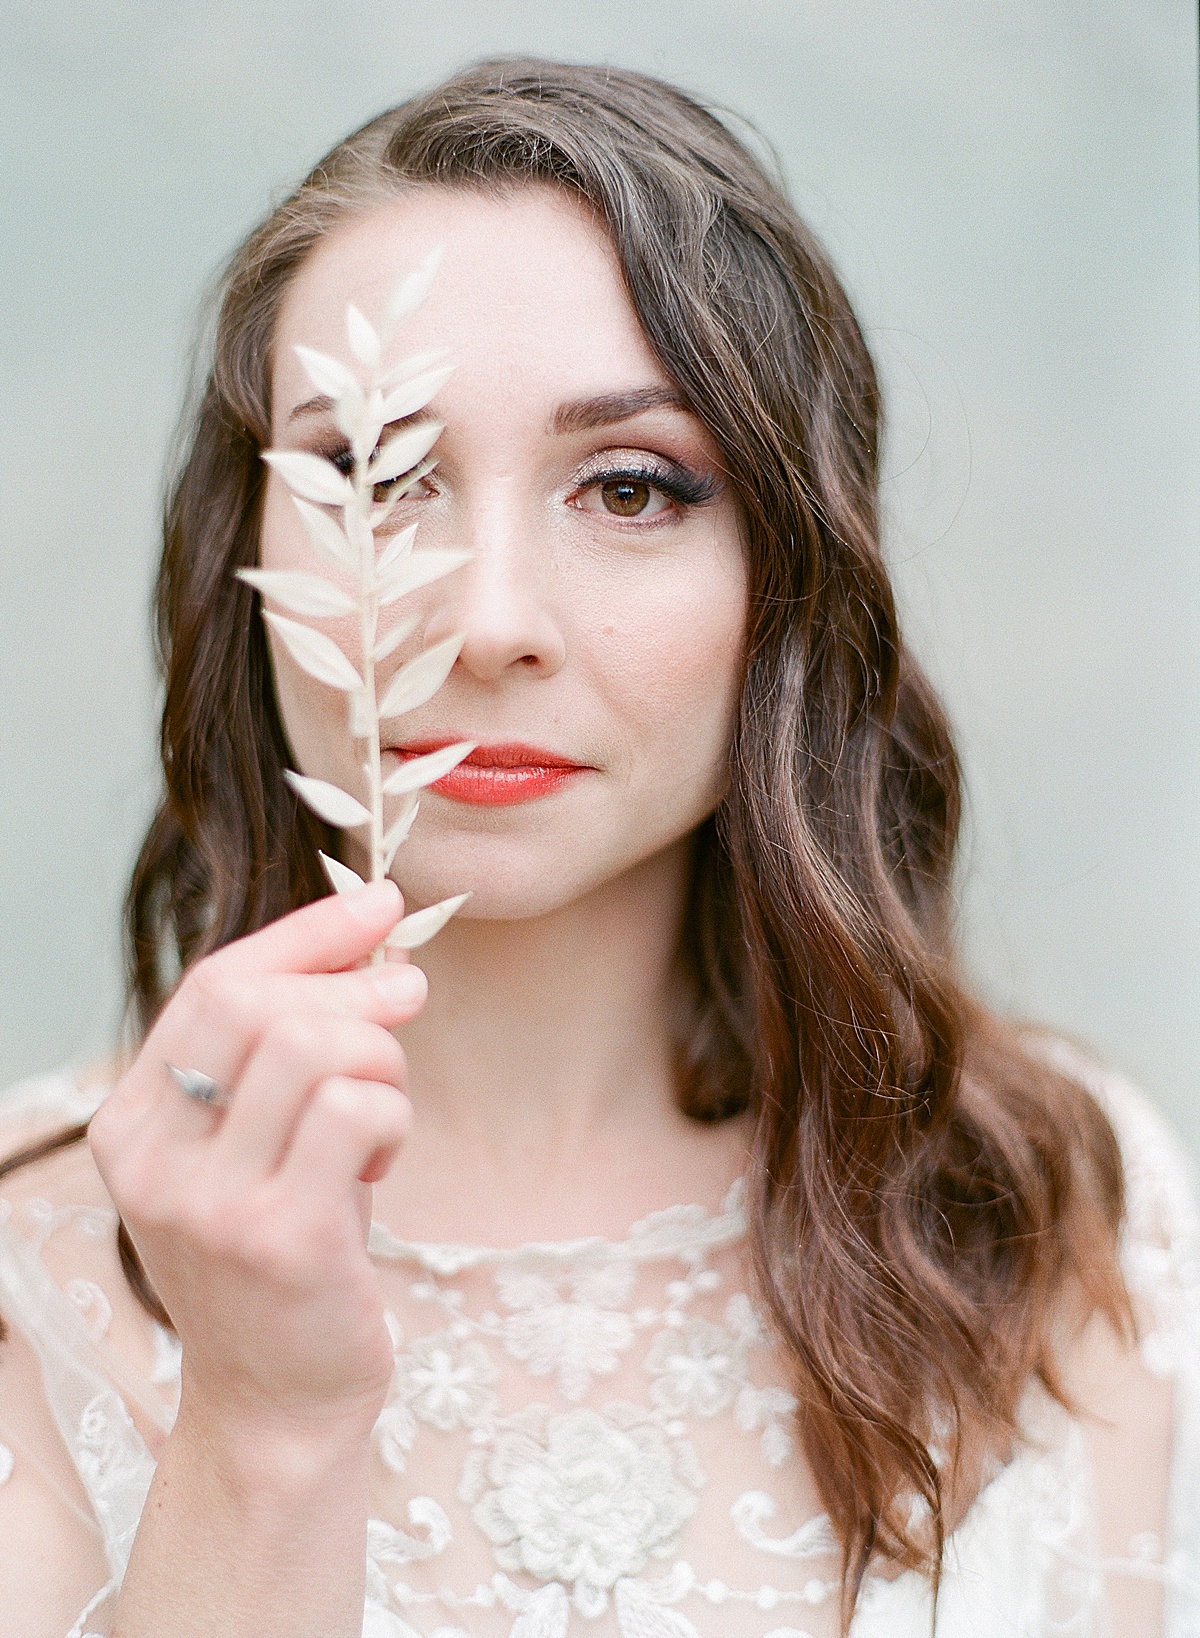 Bride holding Flower in Front of One Eye With Red Lip Stick Photo